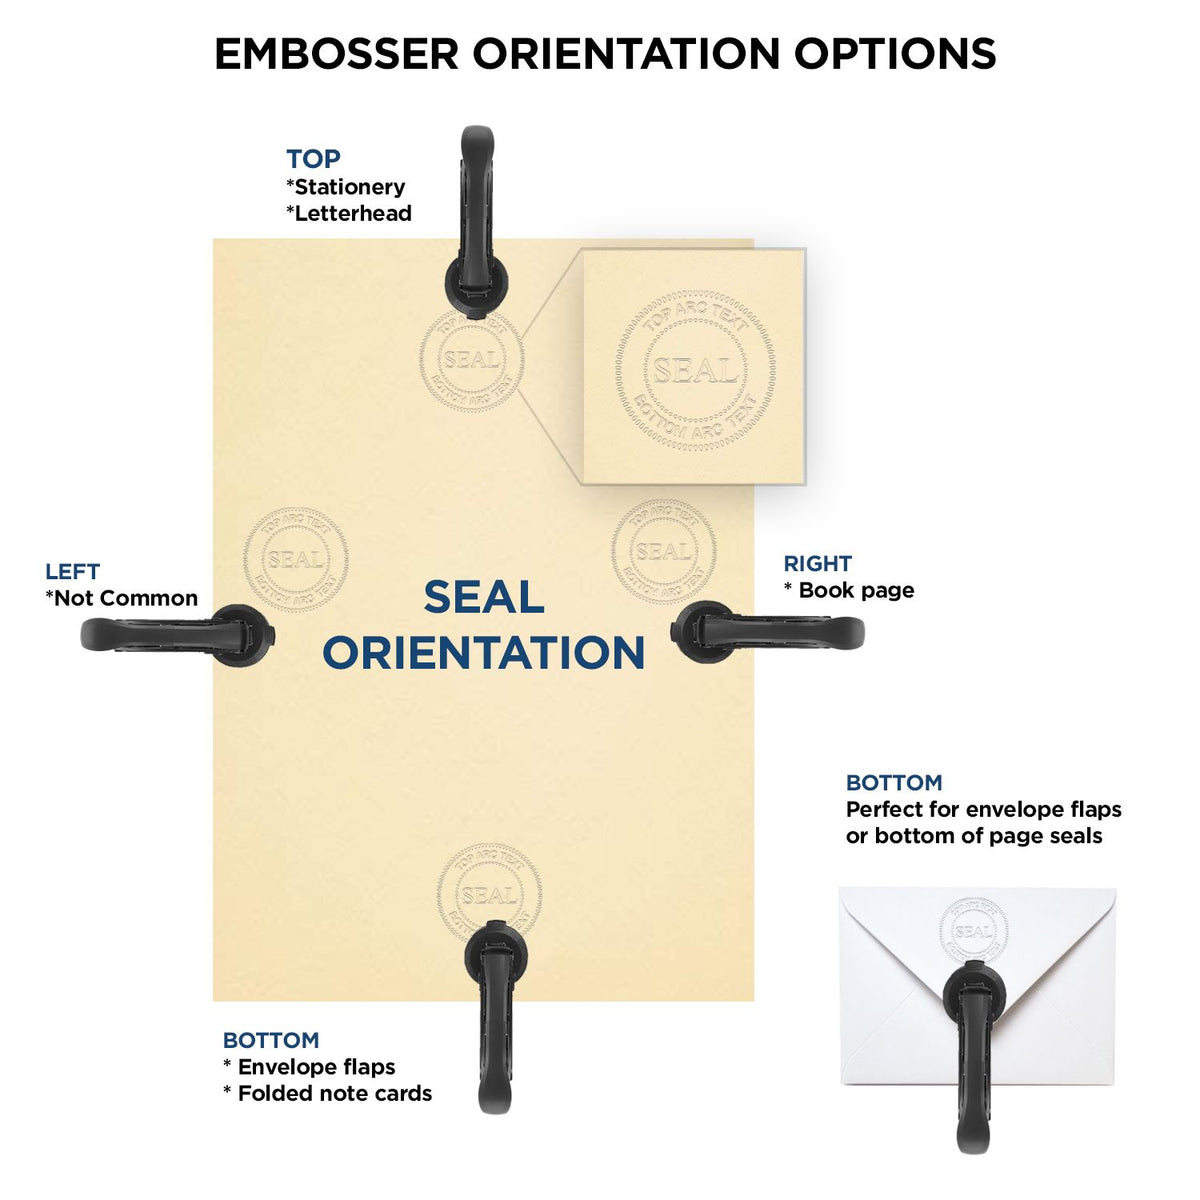 An infographic for the Handheld Michigan Professional Geologist Embosser showing embosser orientation, this is showing examples of a top, bottom, right and left insert.